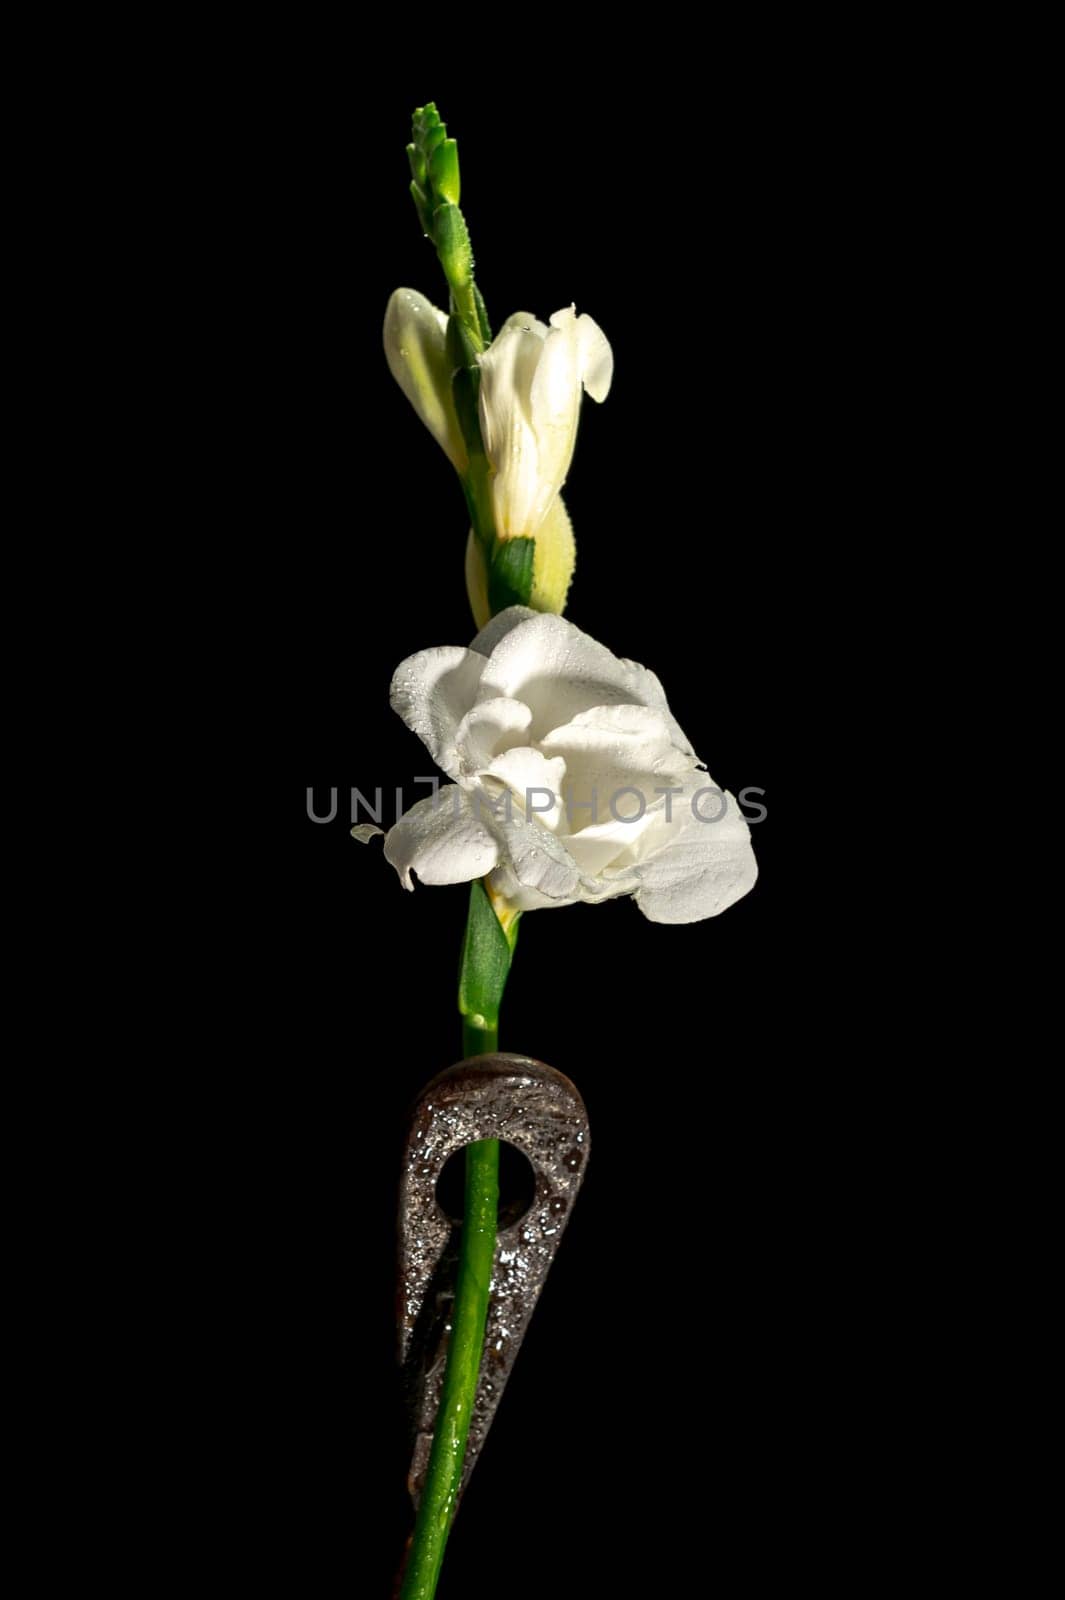 Old rusty metal tool and white freesia on a black background by Multipedia